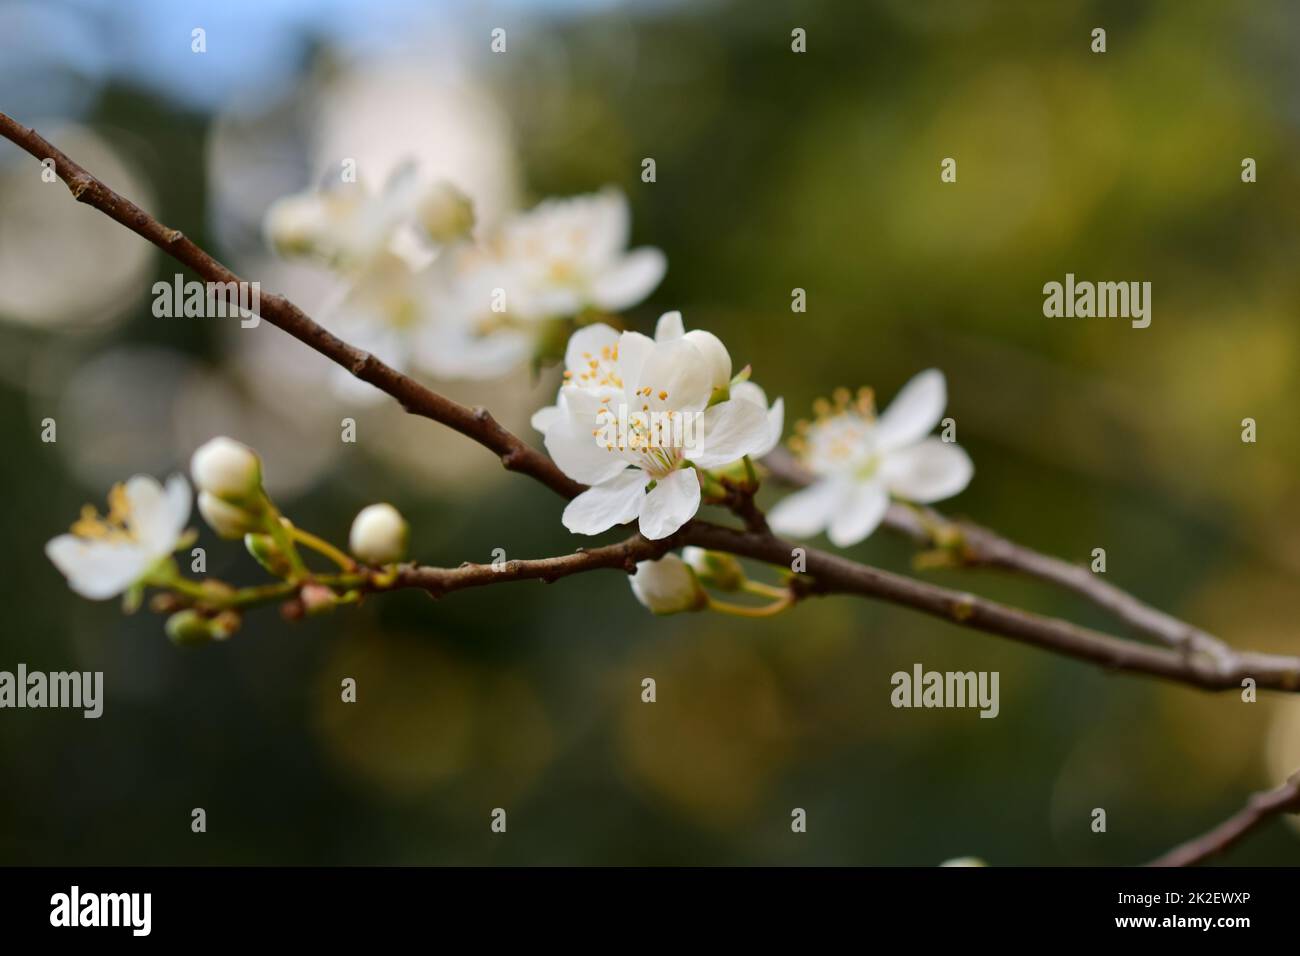 Close up of white blossoms against a brown and green blurred background Stock Photo